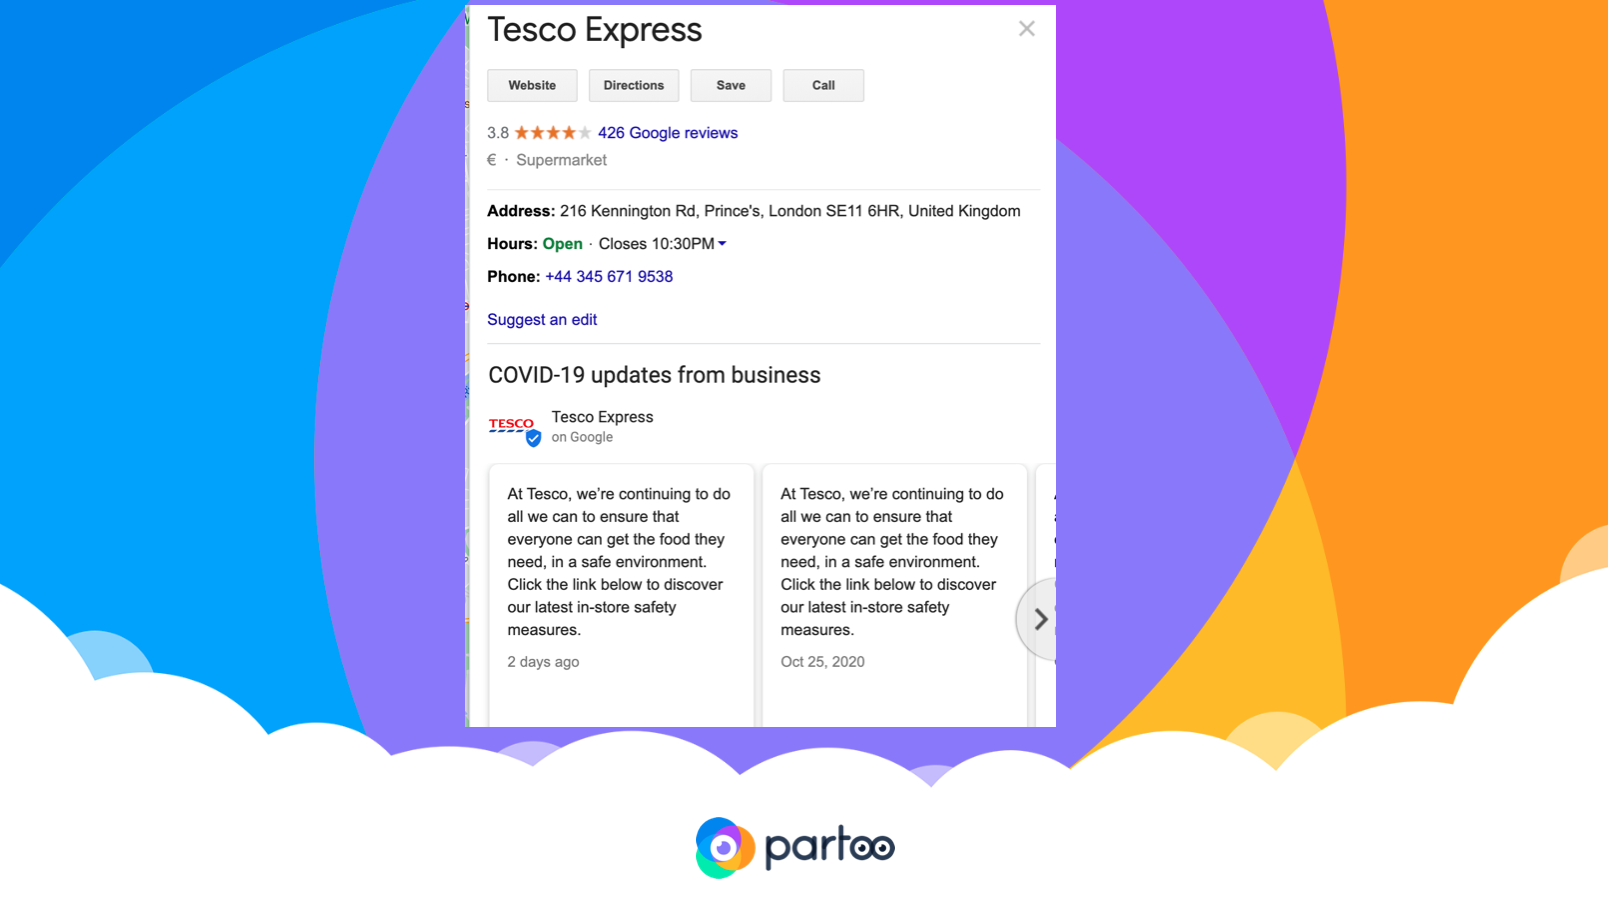 Covid-19 updates on Google posts for tesco